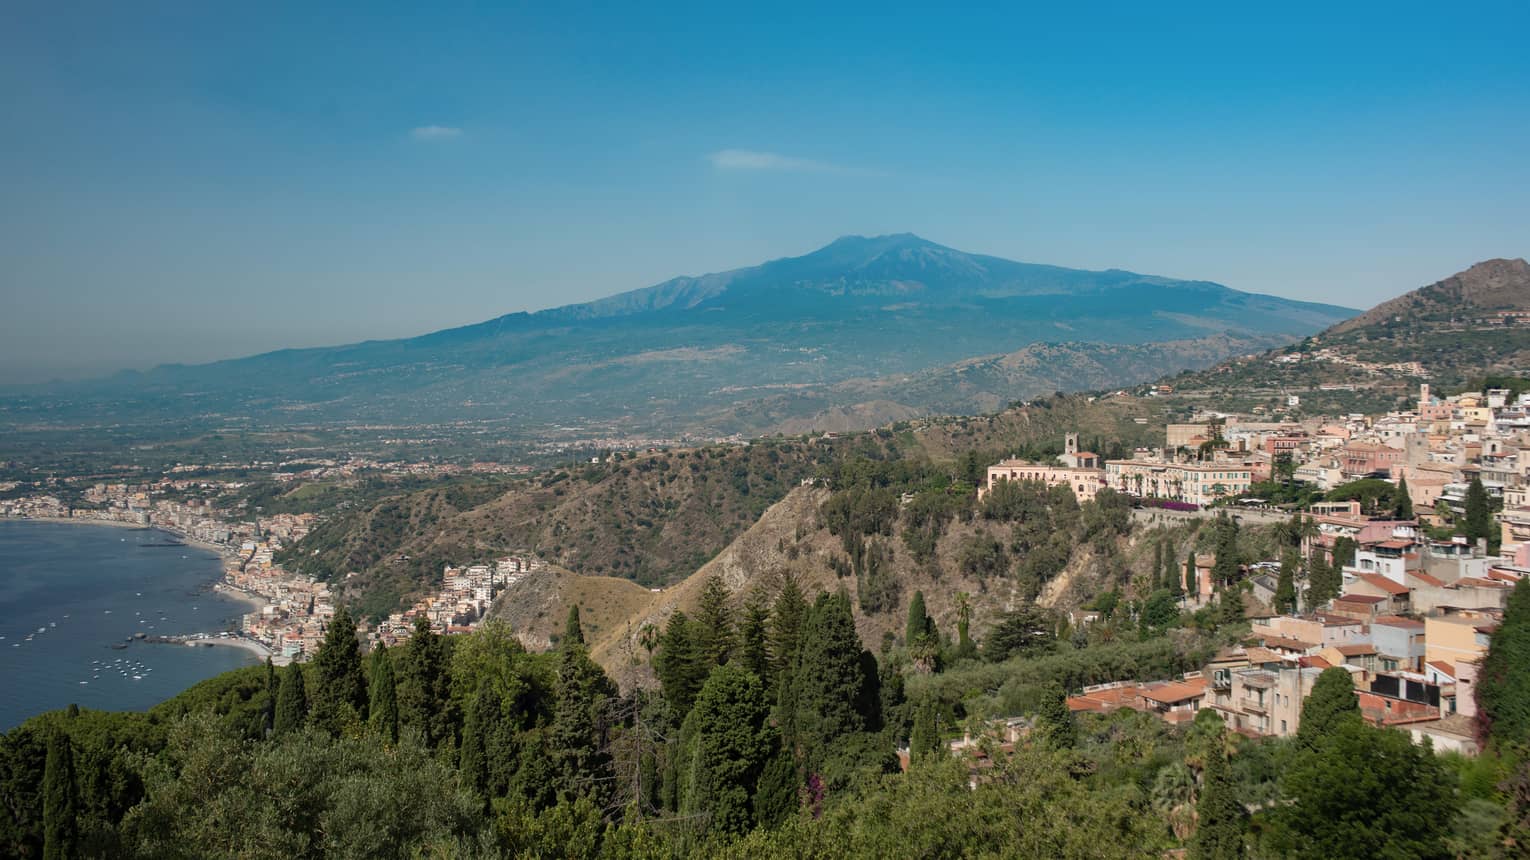 View of Taormina town on hillside, overlooking the sea